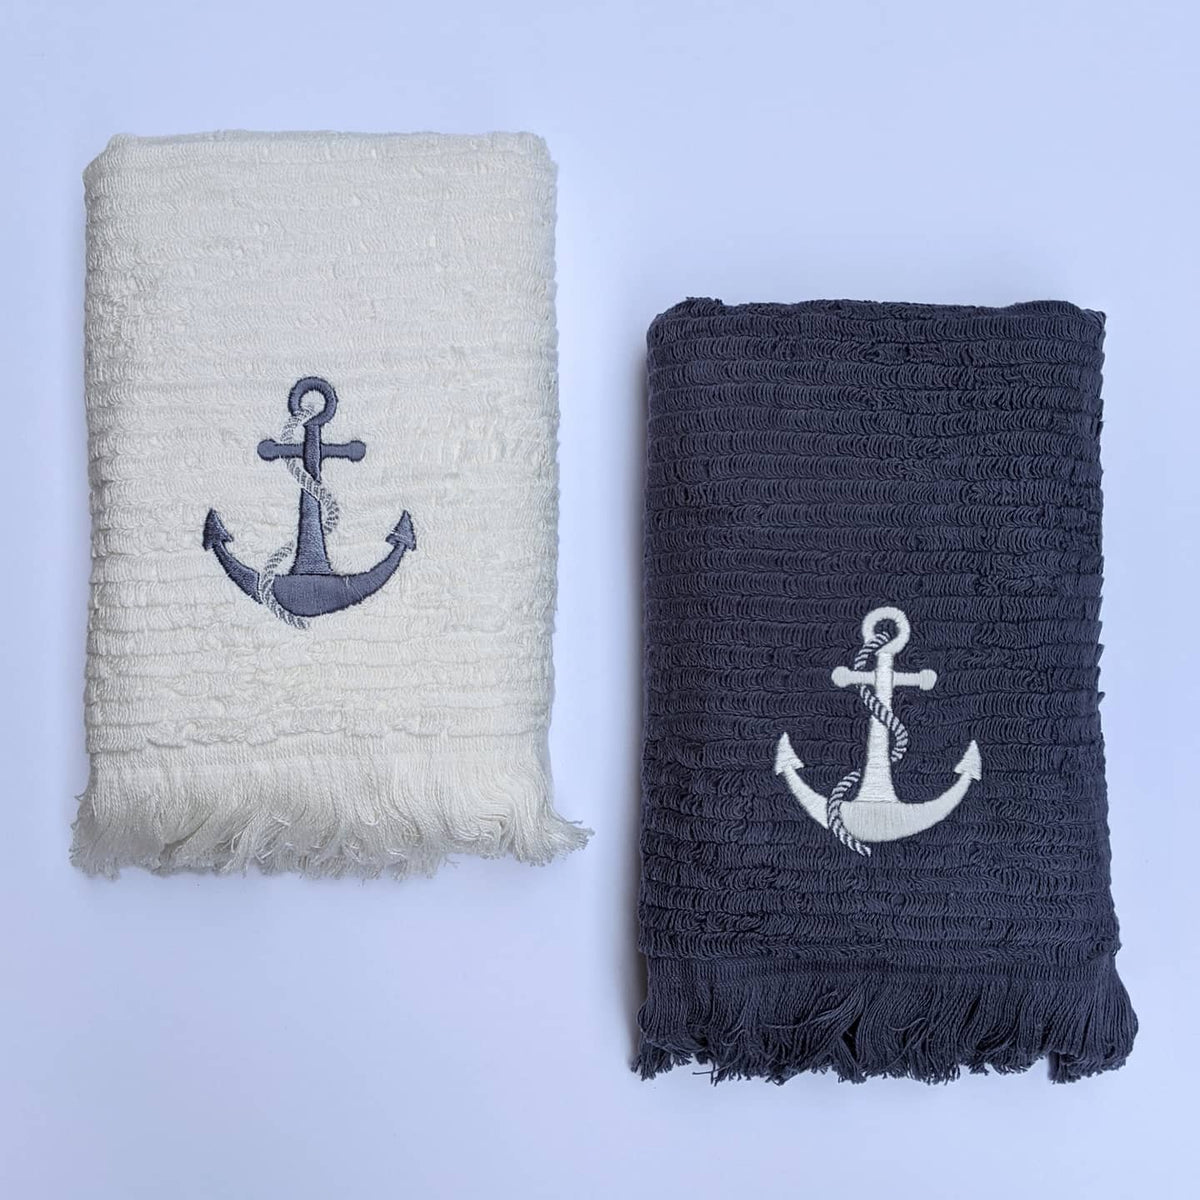 Hand Towels, Terry Off White and Purple with Anchor Embroidery and extra long loops for absorbency